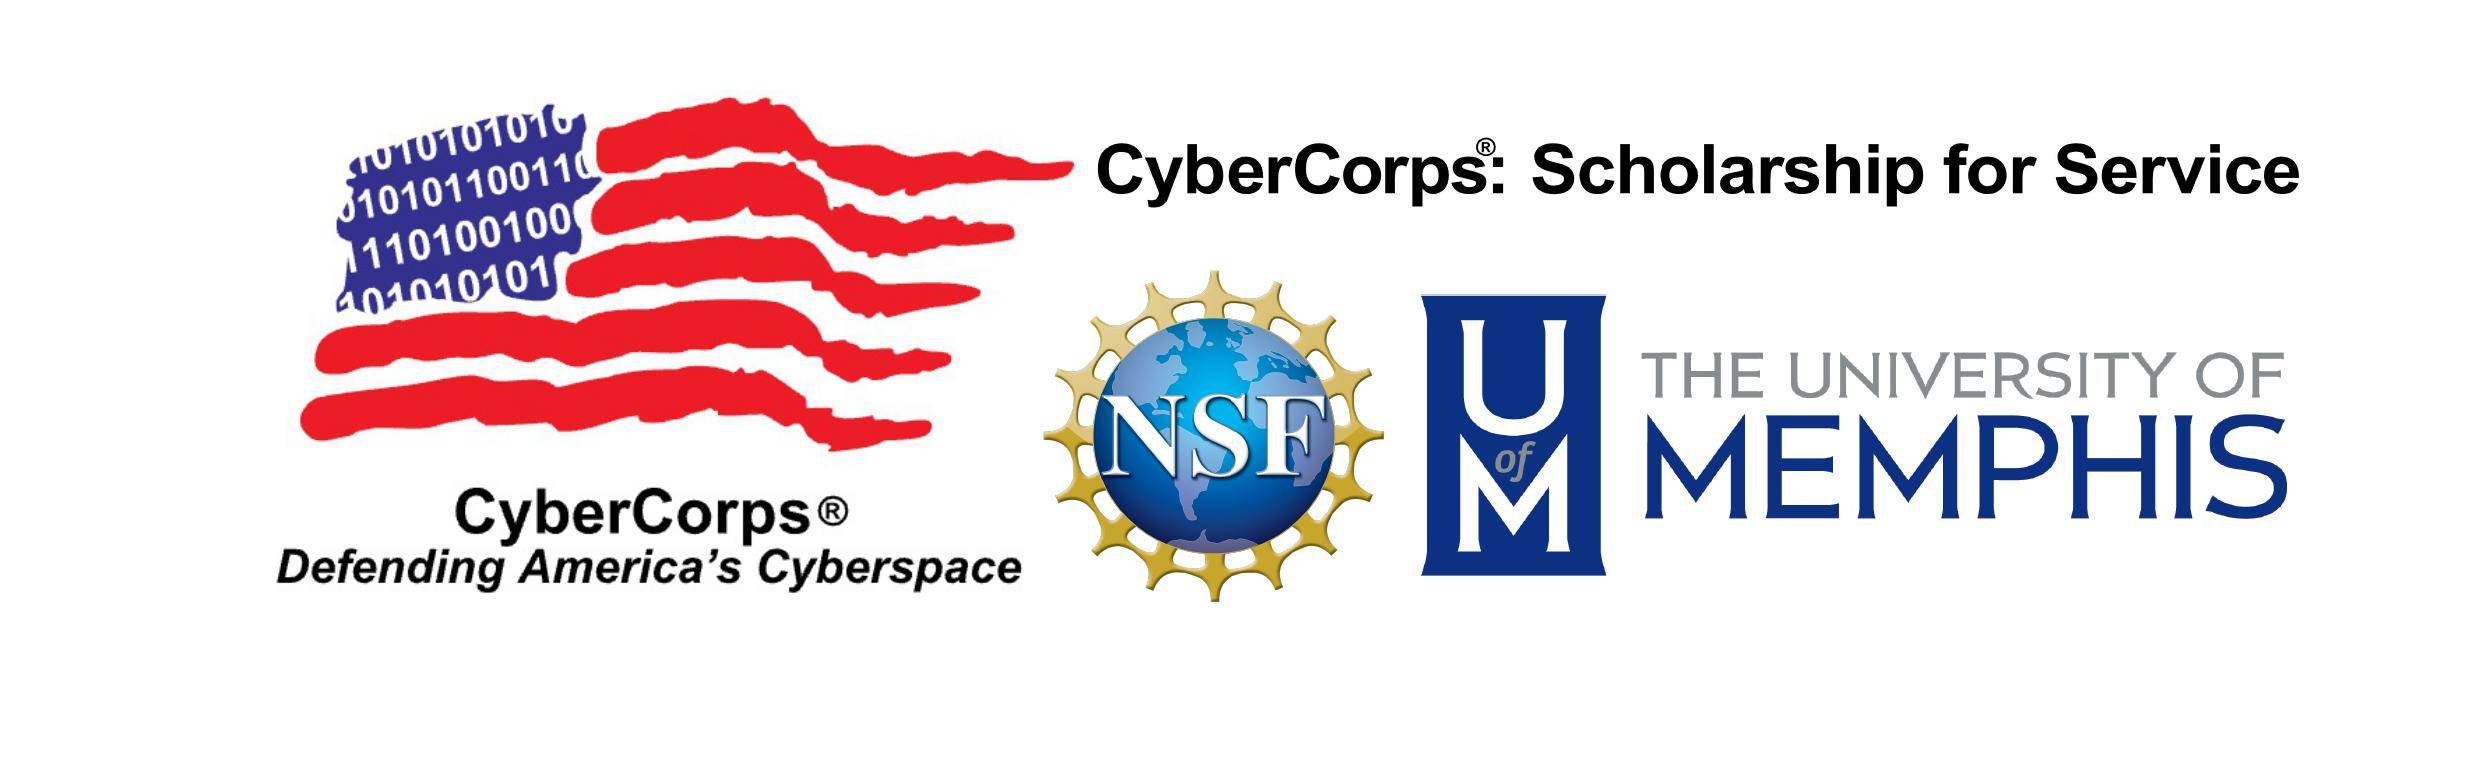 CyberCorps®: Scholarship for Service